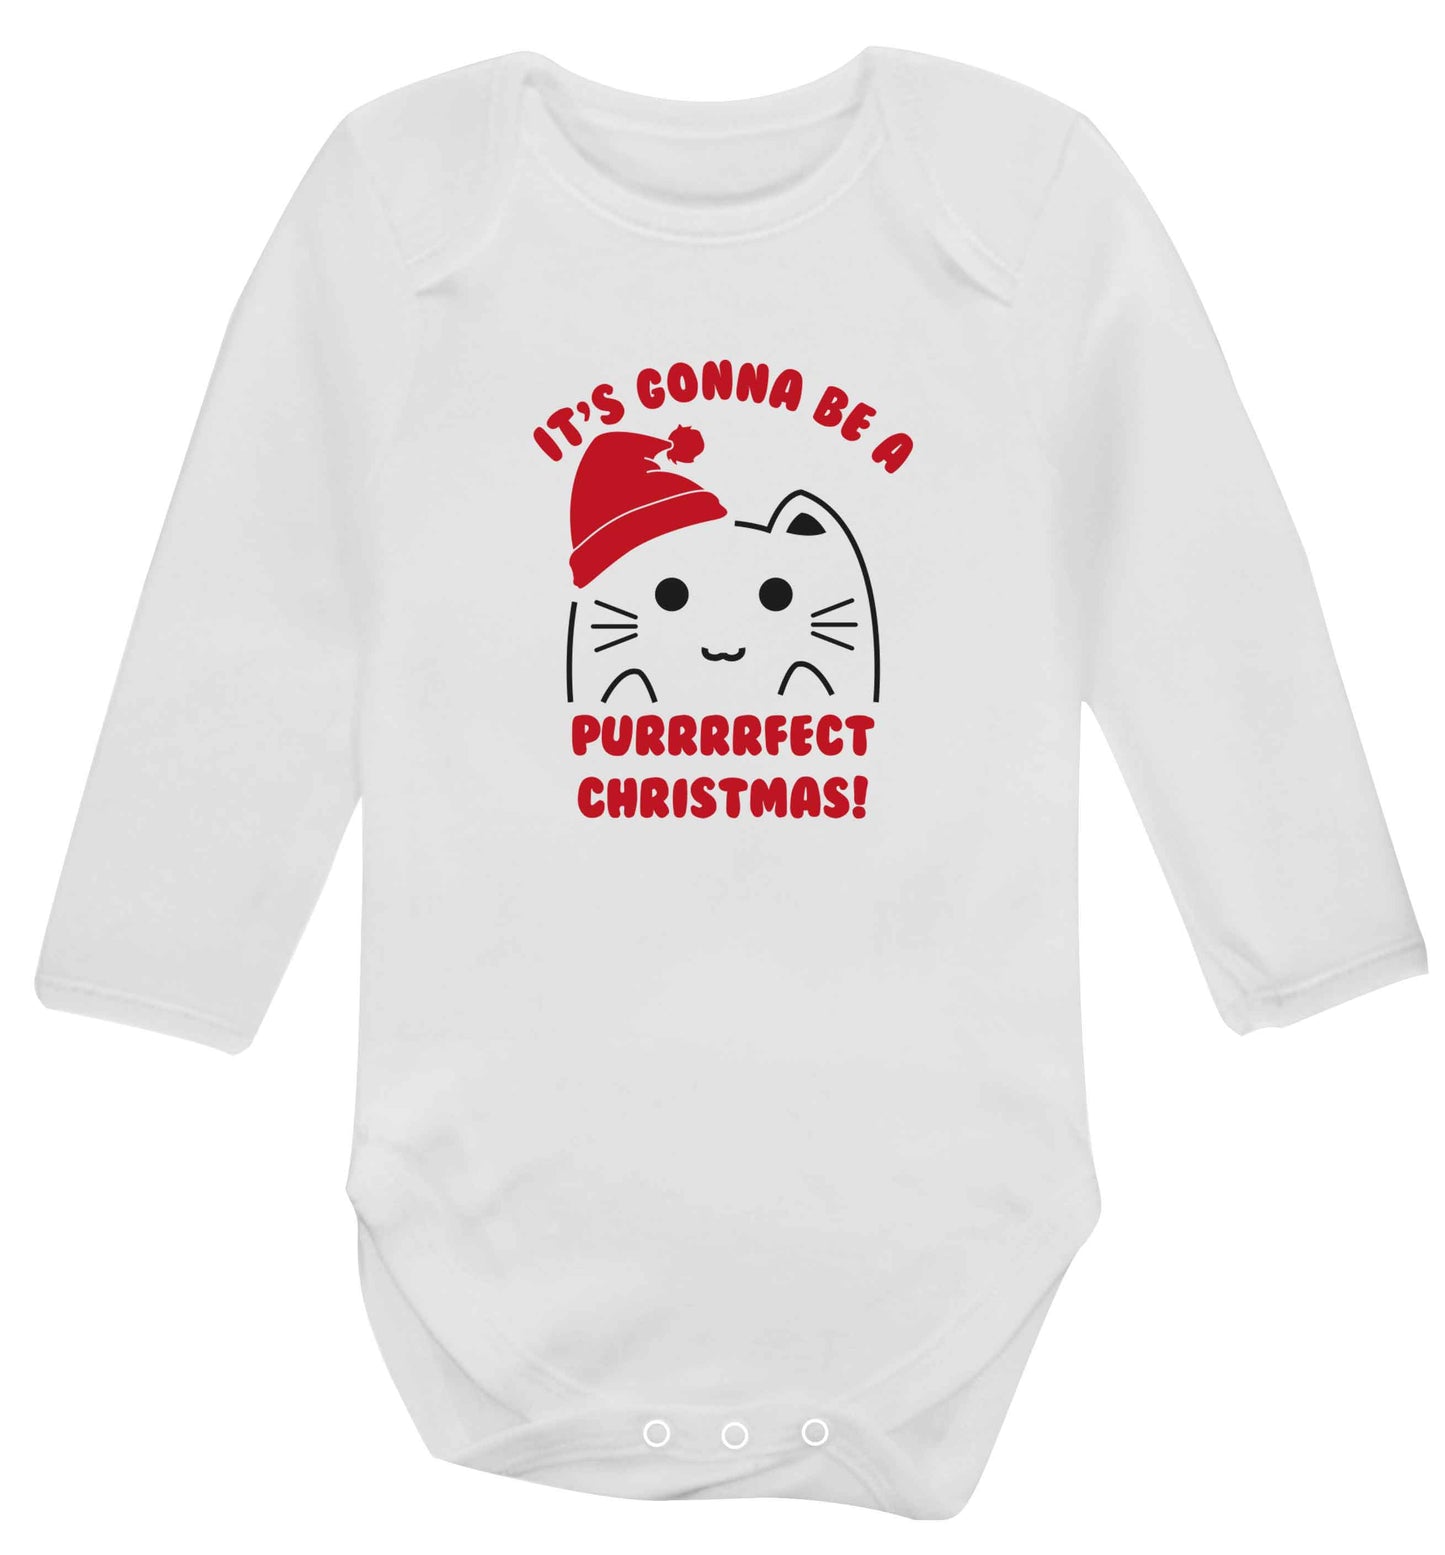 It's going to be a purrfect Christmas baby vest long sleeved white 6-12 months